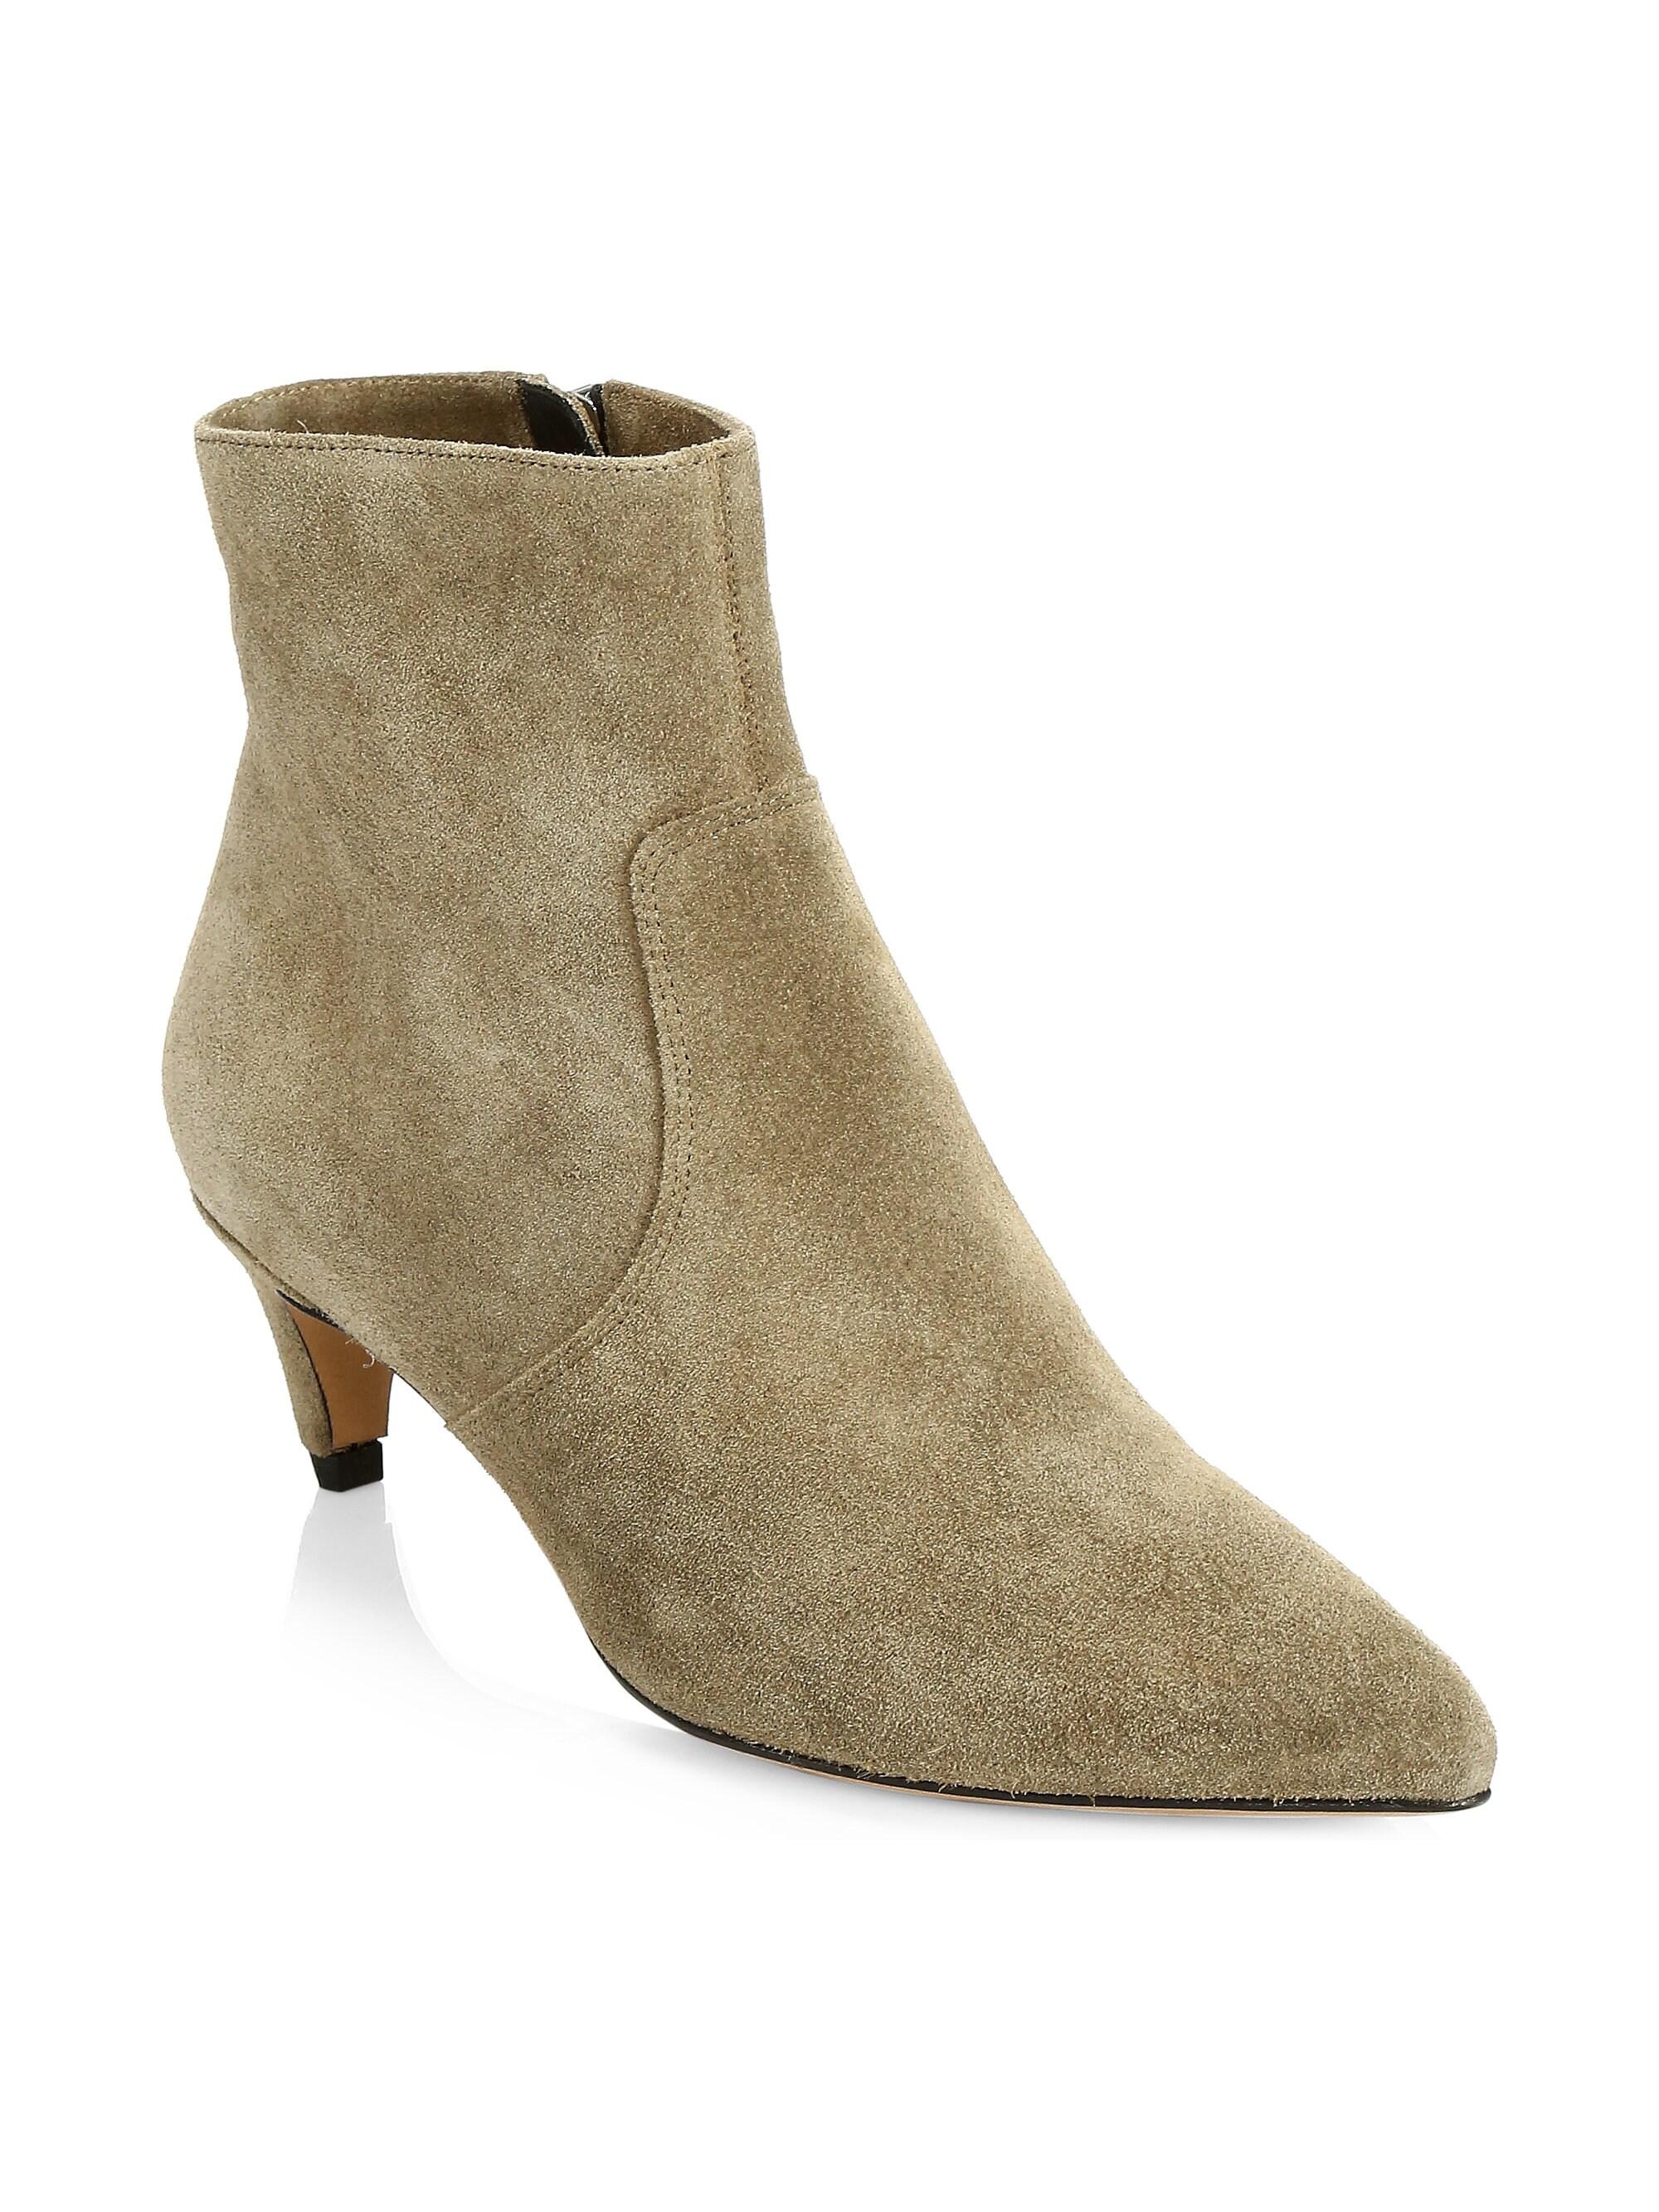 Isabel Marant Derst Suede Ankle Boots in Olive (Green) - Lyst